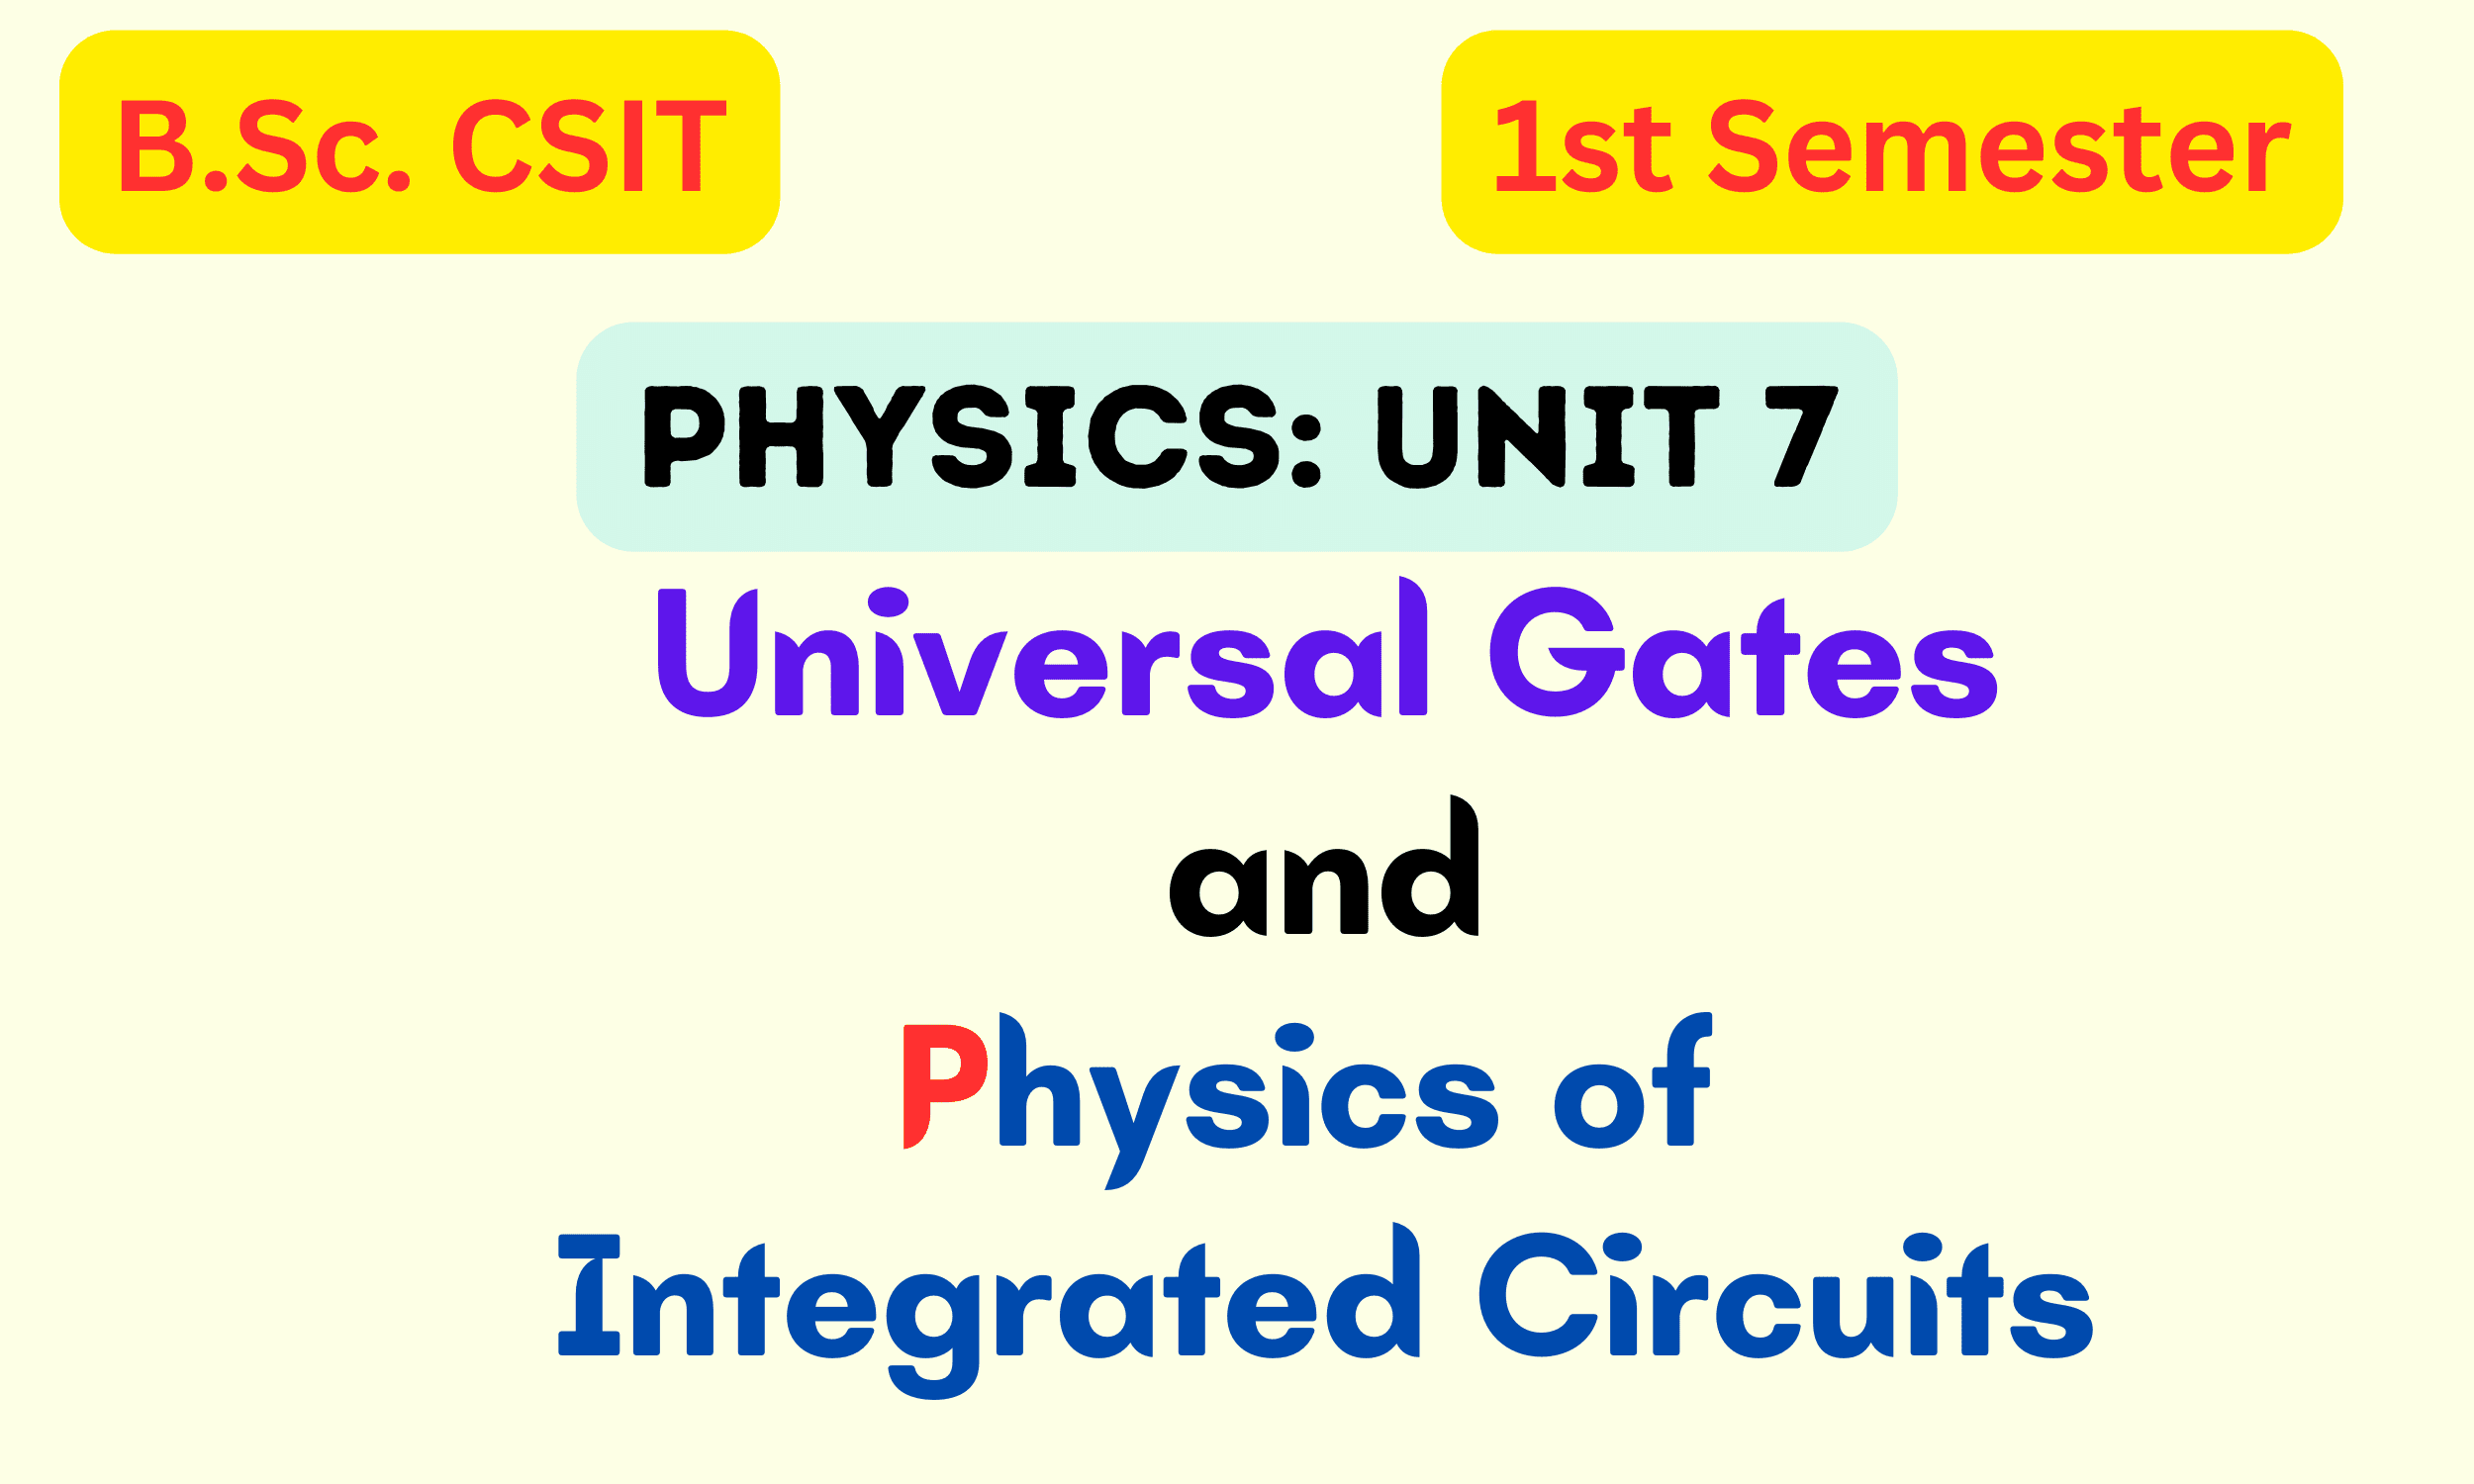 Universal Gates and Physics of Integrated Circuits: B.Sc. CSIT Physics Unit 7 Notes